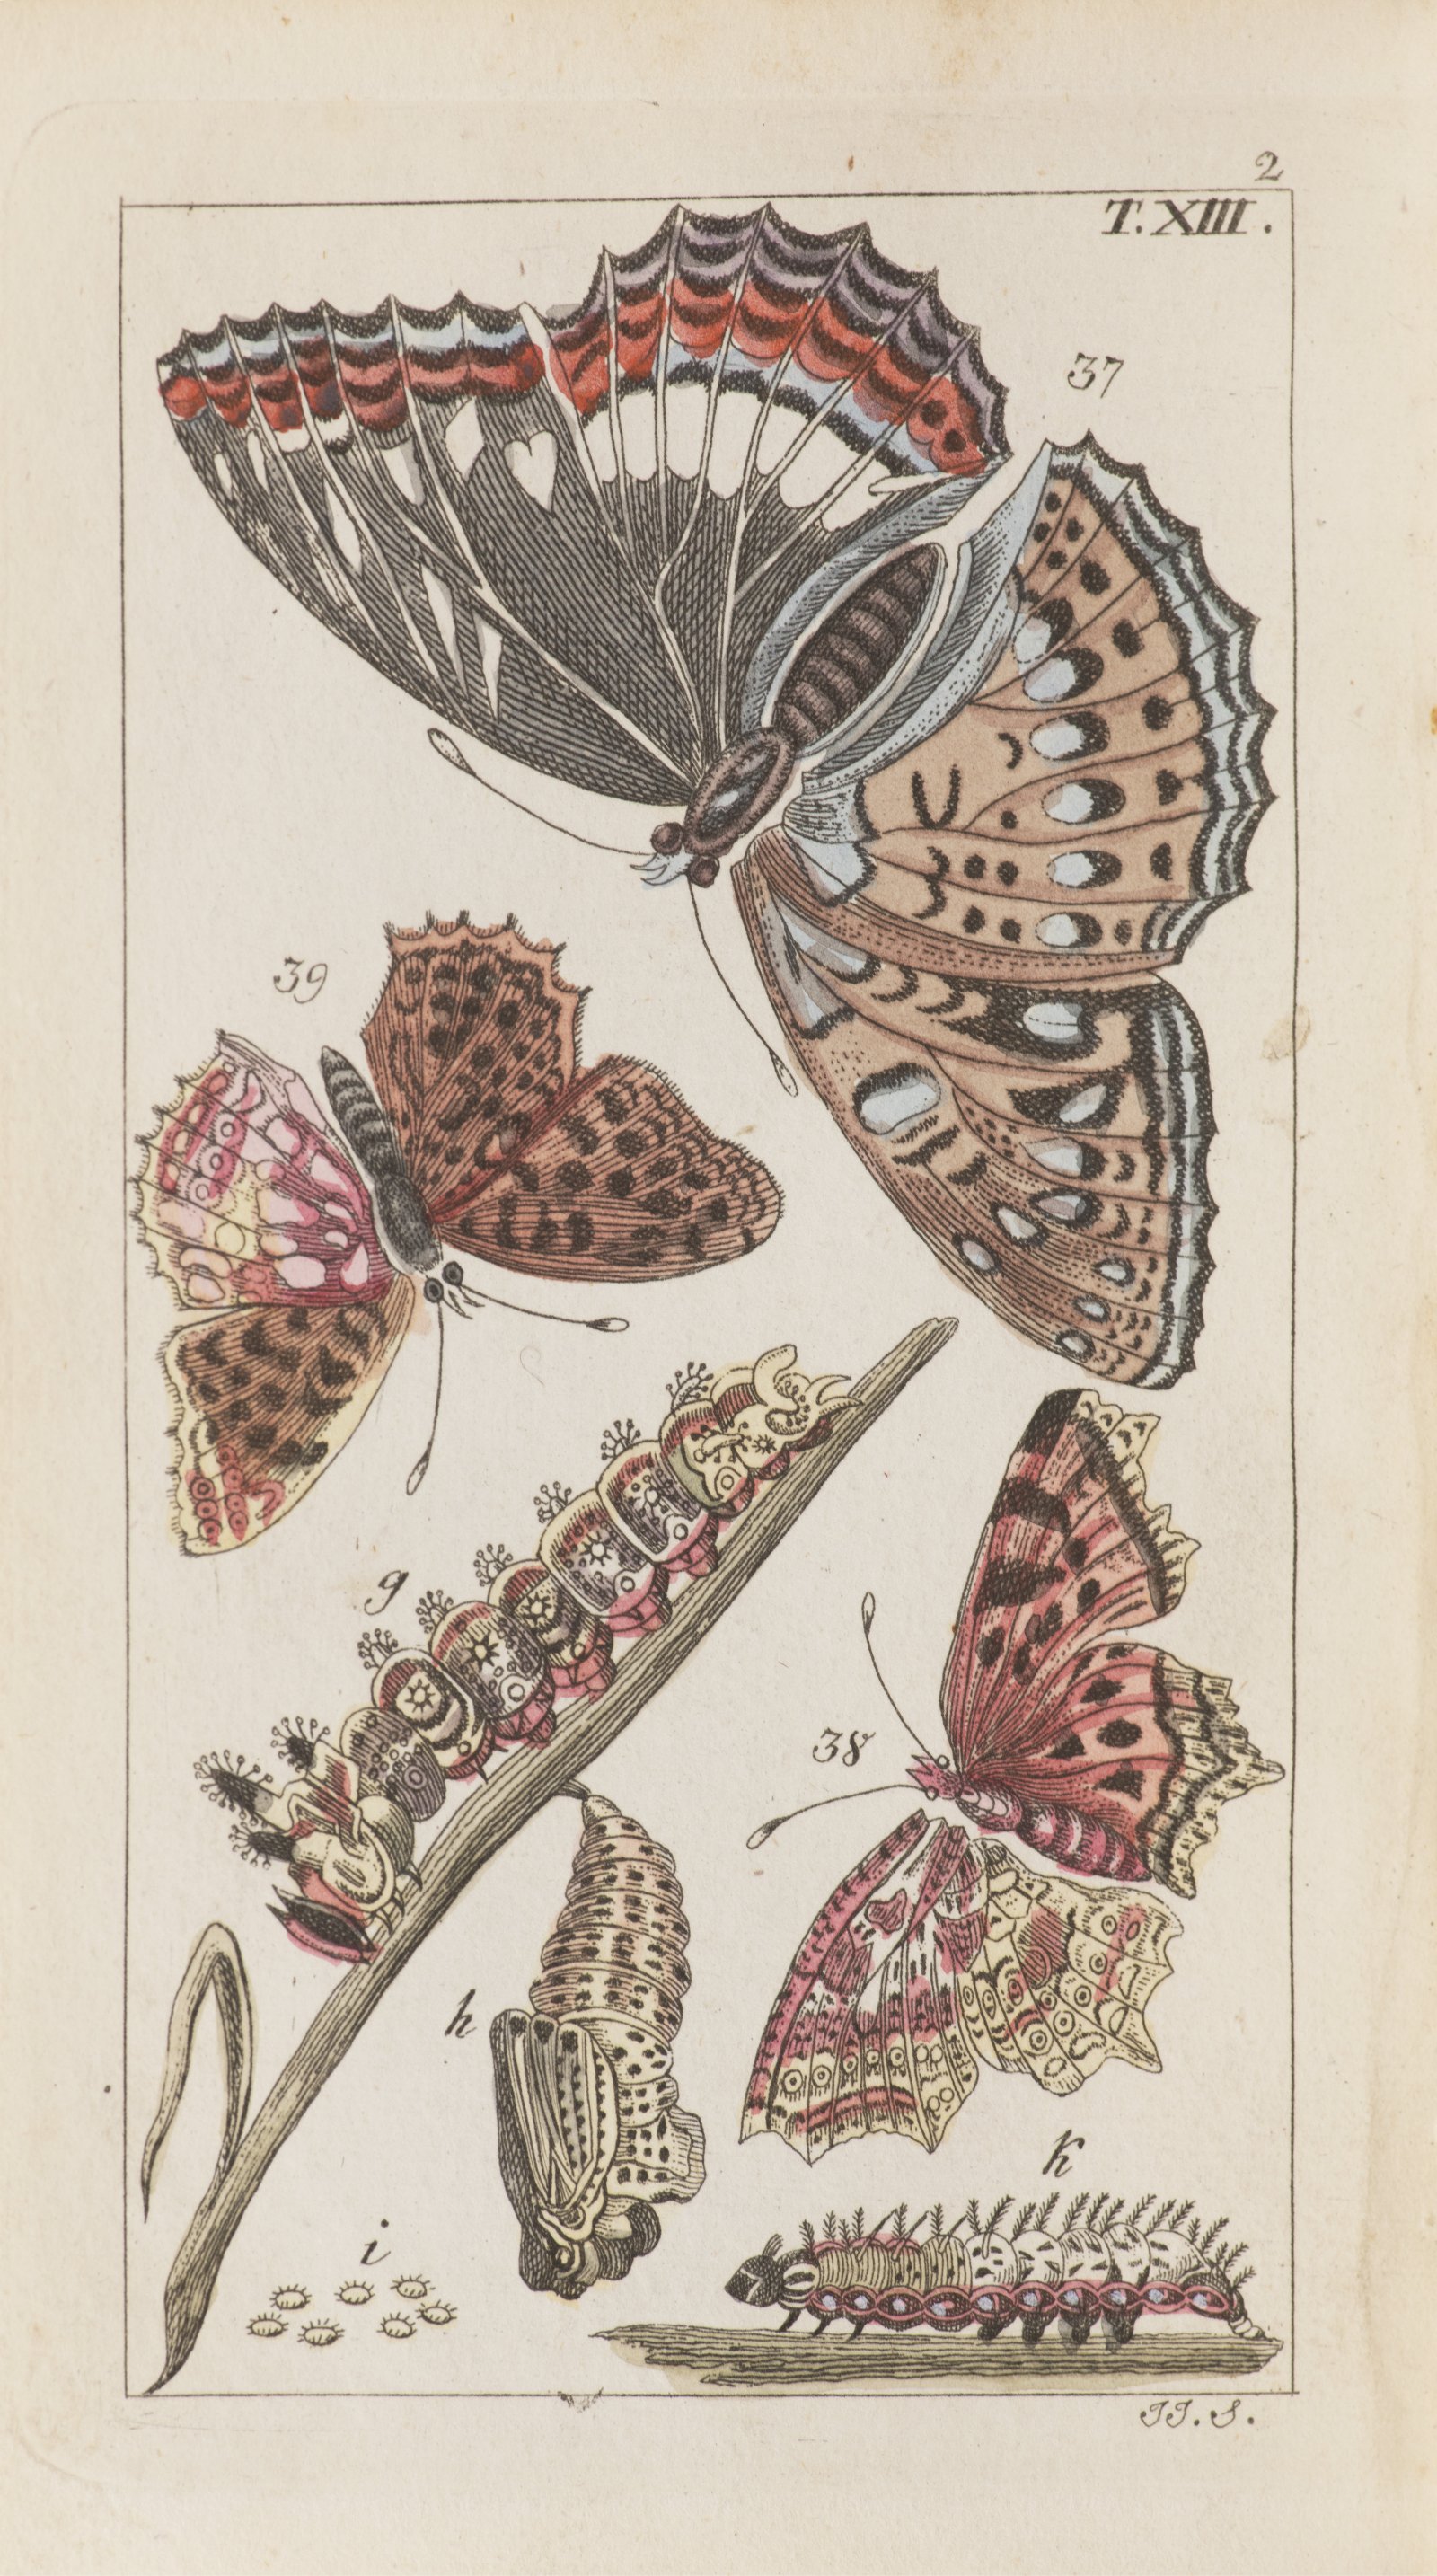 J.J. SCHMUZER 1795 - 1810: ATLAS OF INSECTS AND BUTTERFLIES Ca. 1810 Colored copperplate engravings, - Image 2 of 4